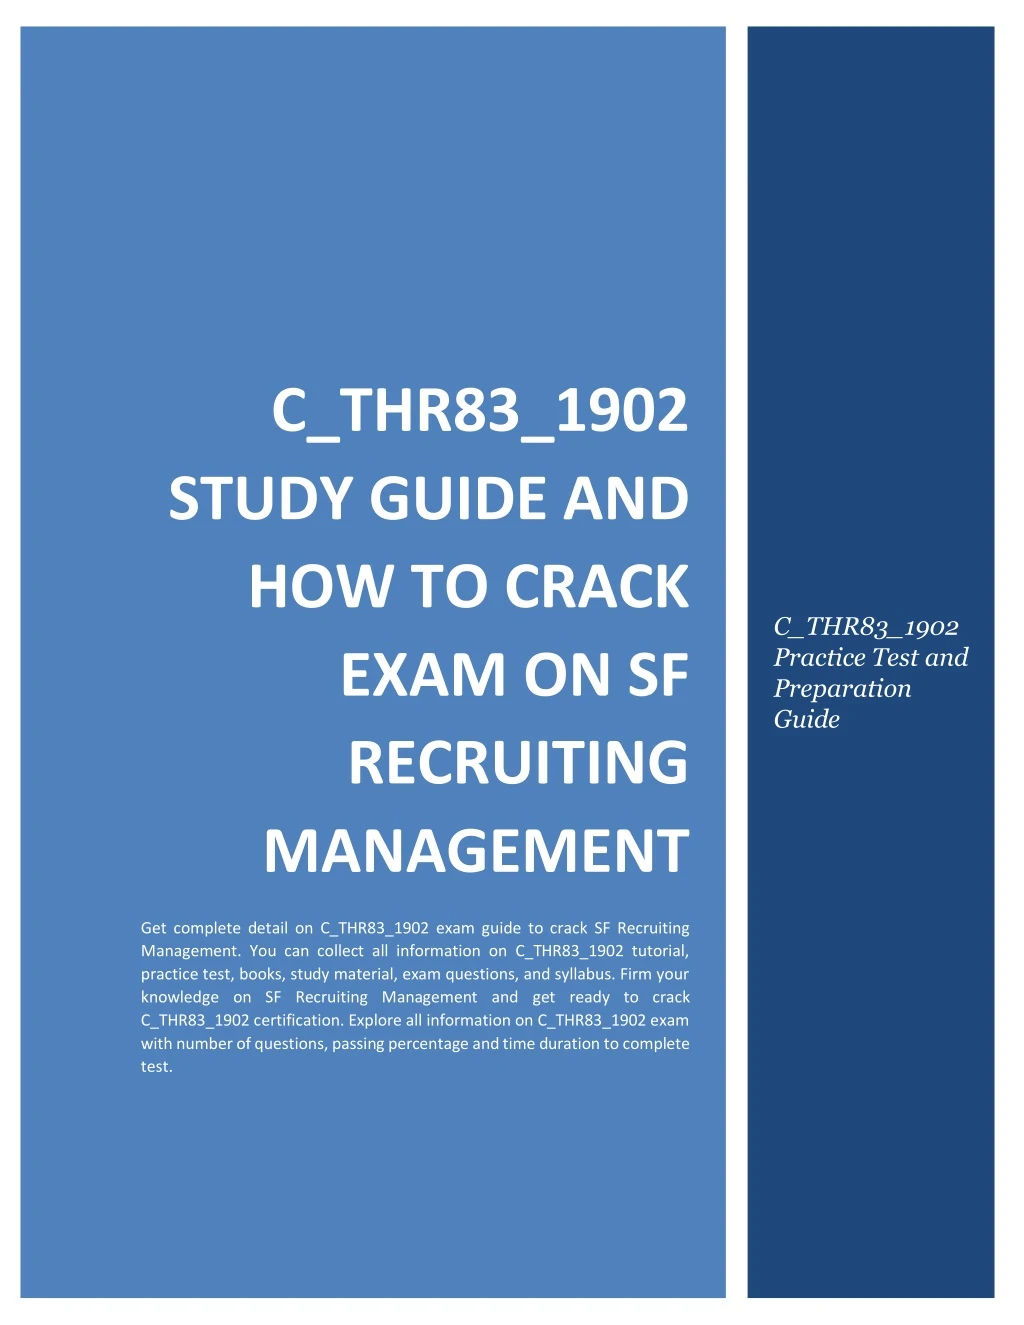 c thr83 1902 study guide and how to crack exam